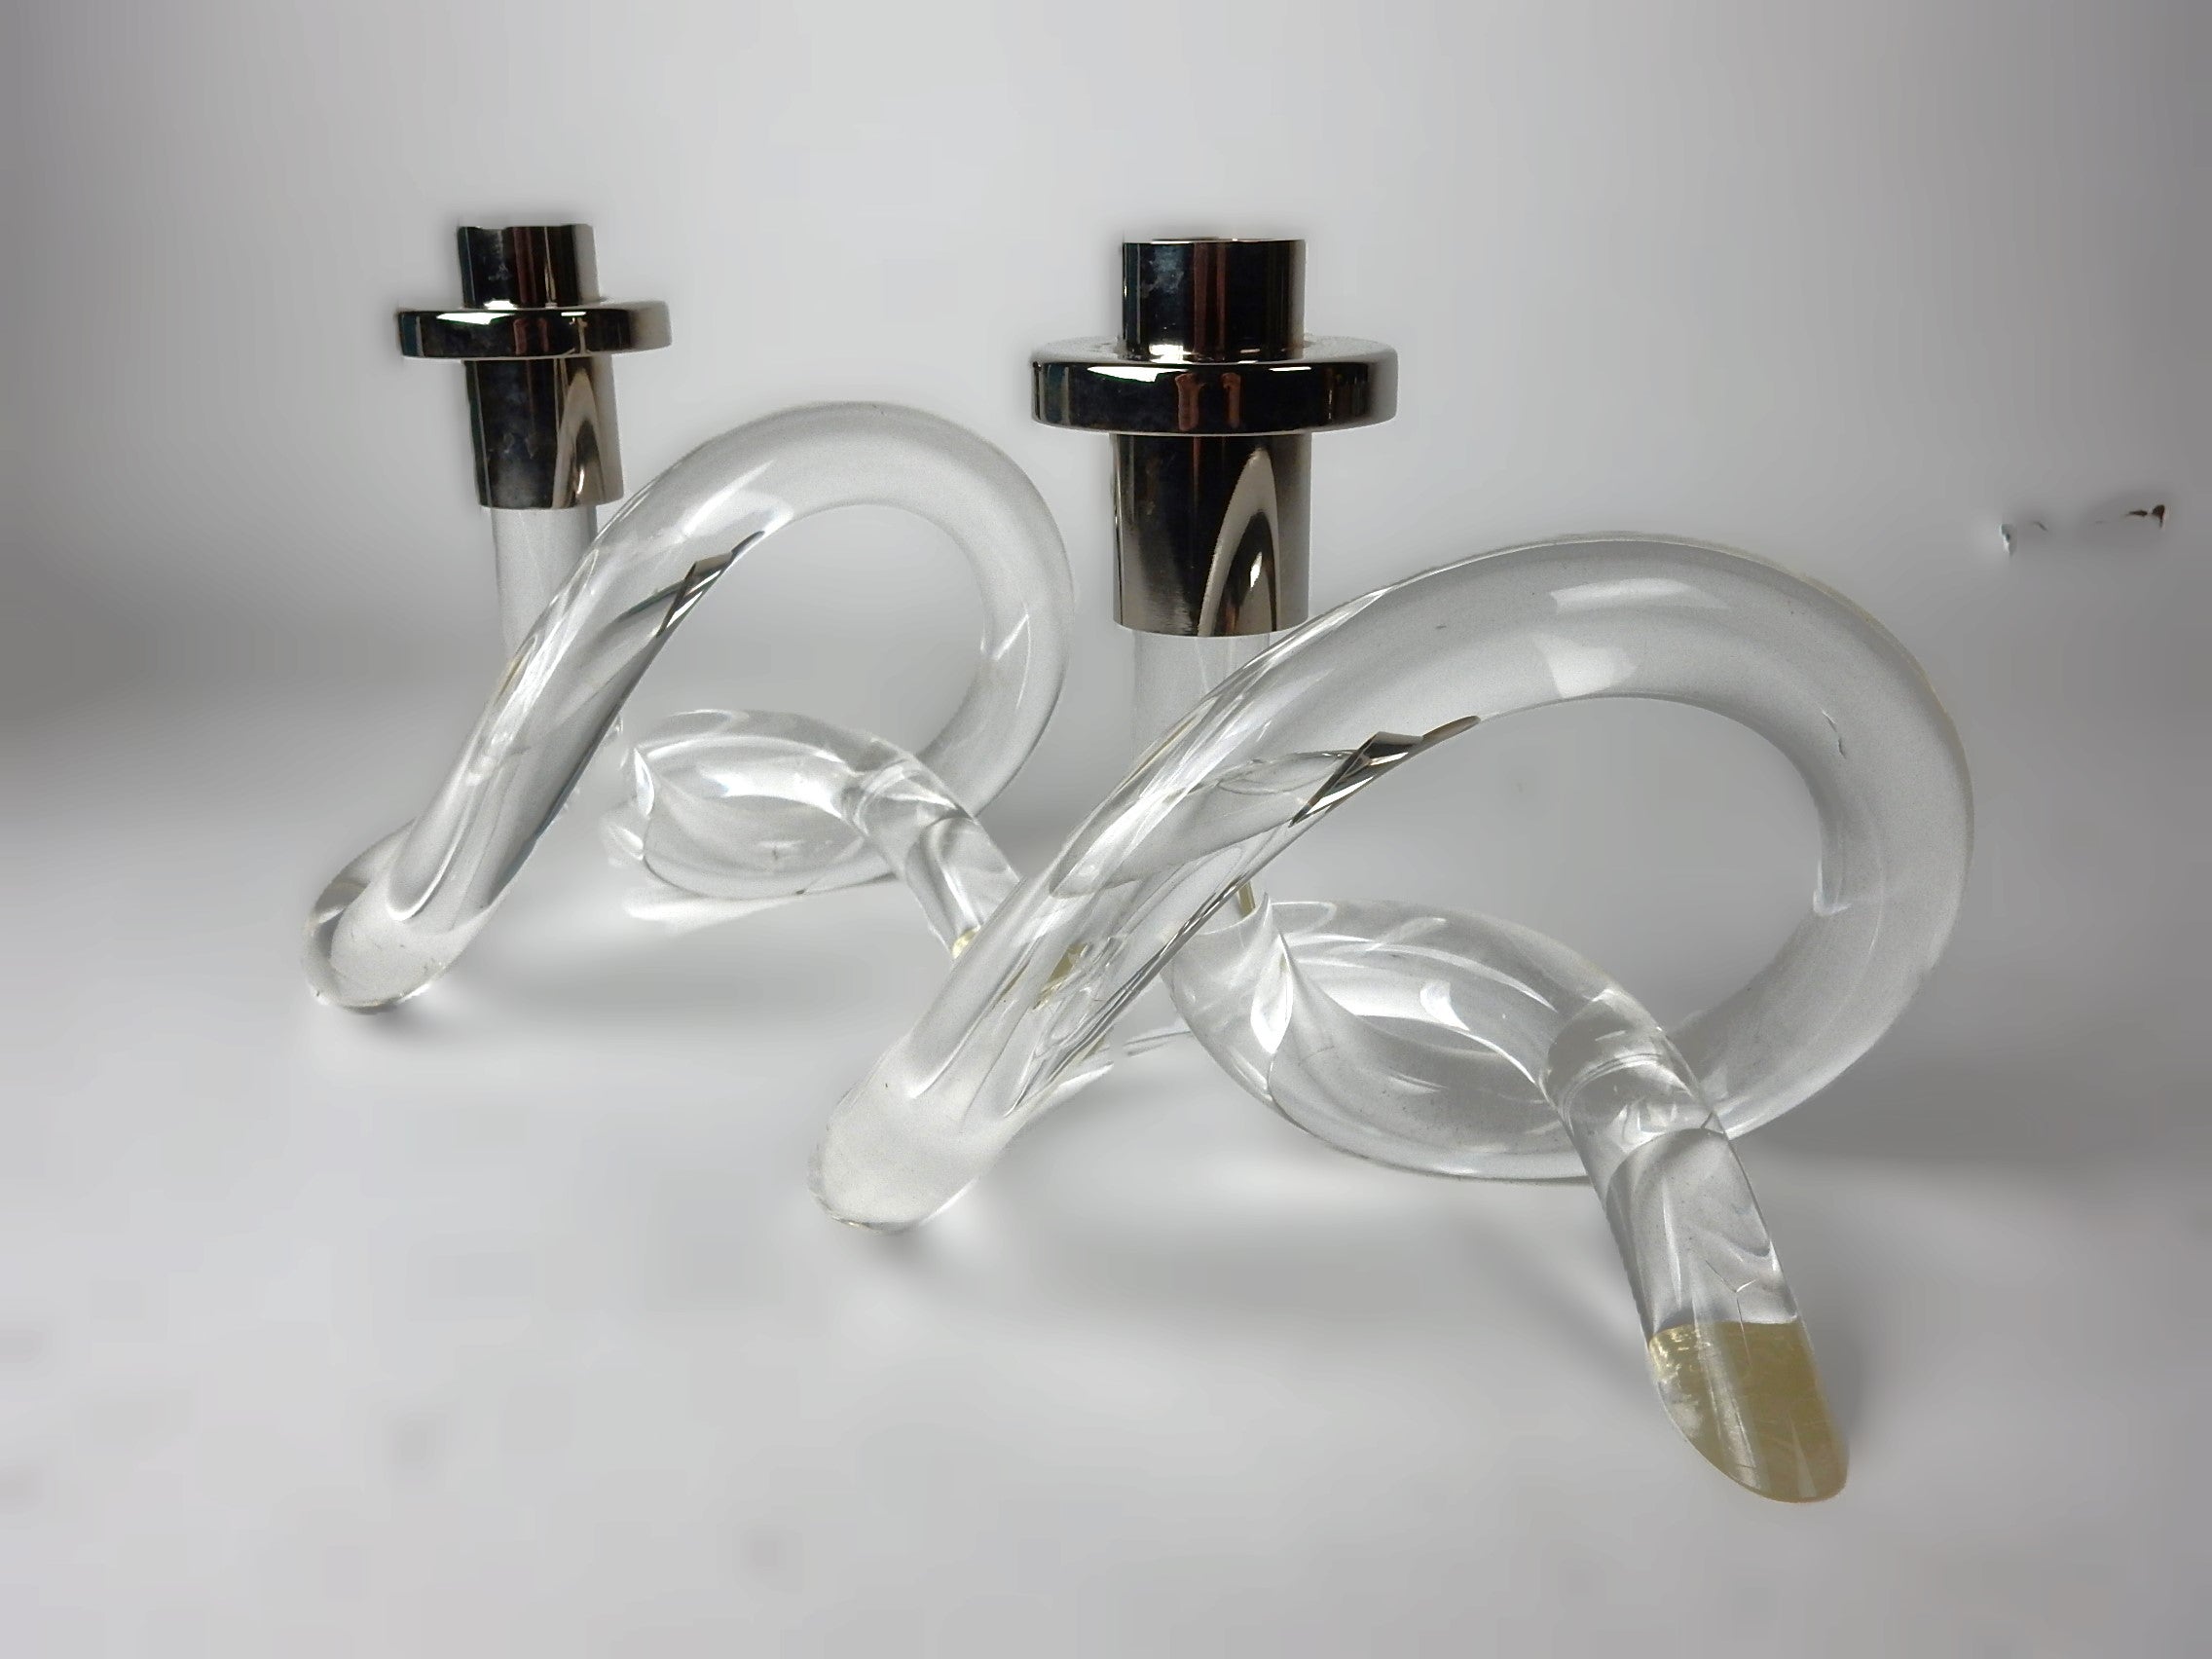 Mid-Century Modern 1970's Dorothy Thorpe Lucite & Chrome Pretzel Candle Holders Pair For Sale